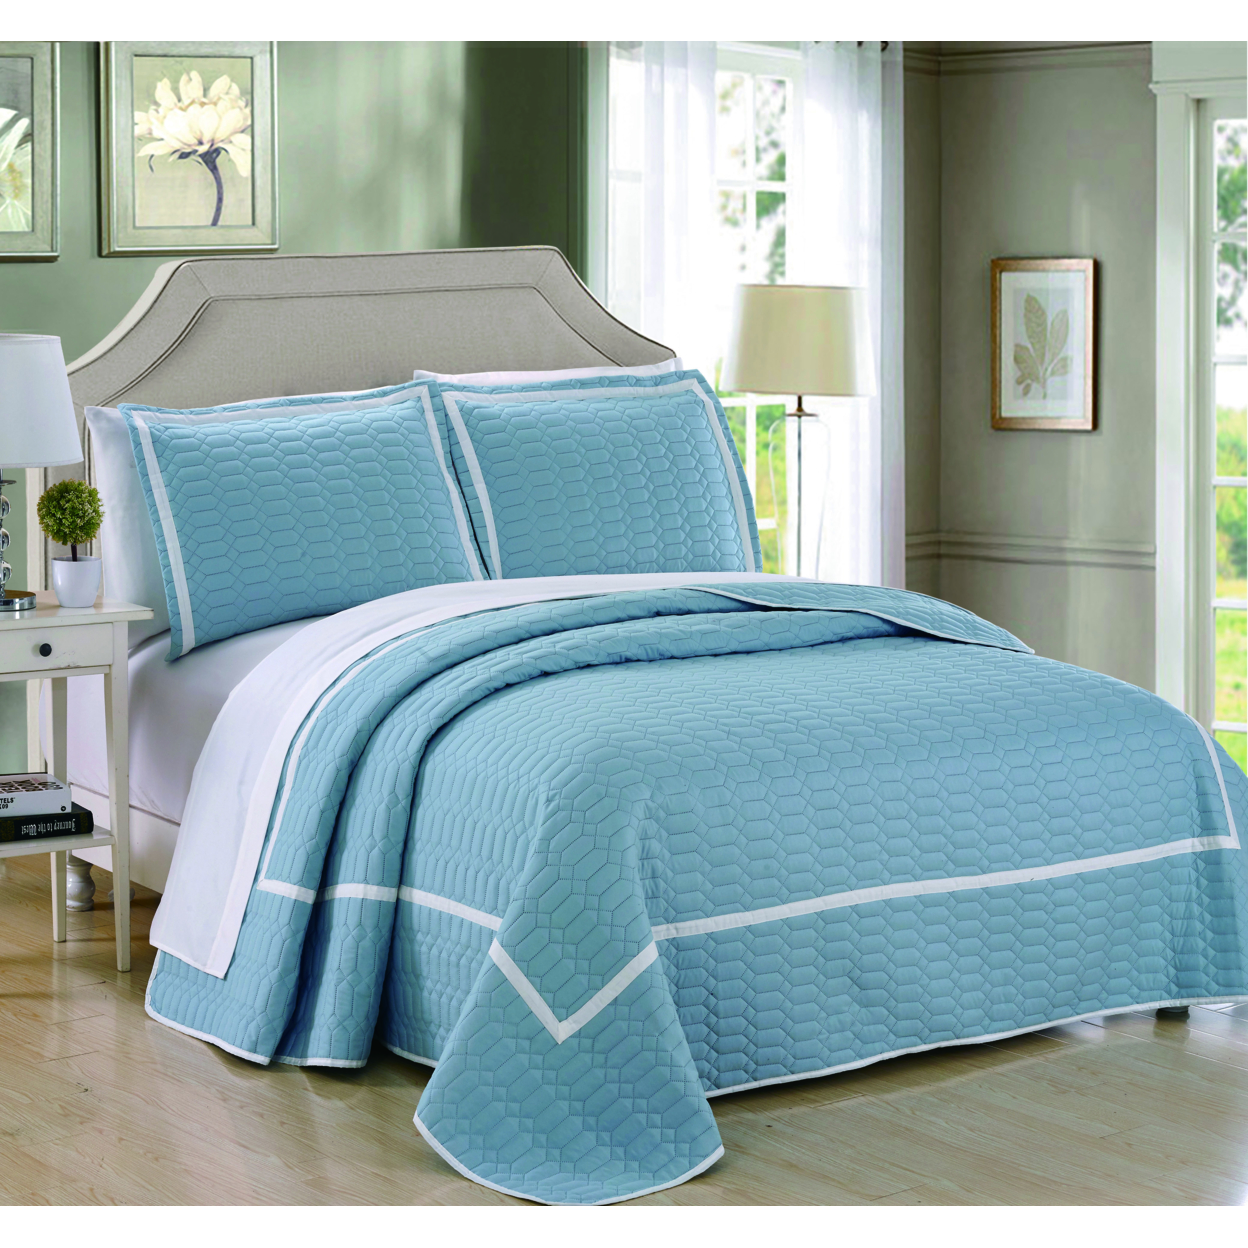 3 Or 2 Piece Halrowe Hotel Collection 2 Tone Banded Quilted Geometrical Embroidered Quilt Set - Blue, King